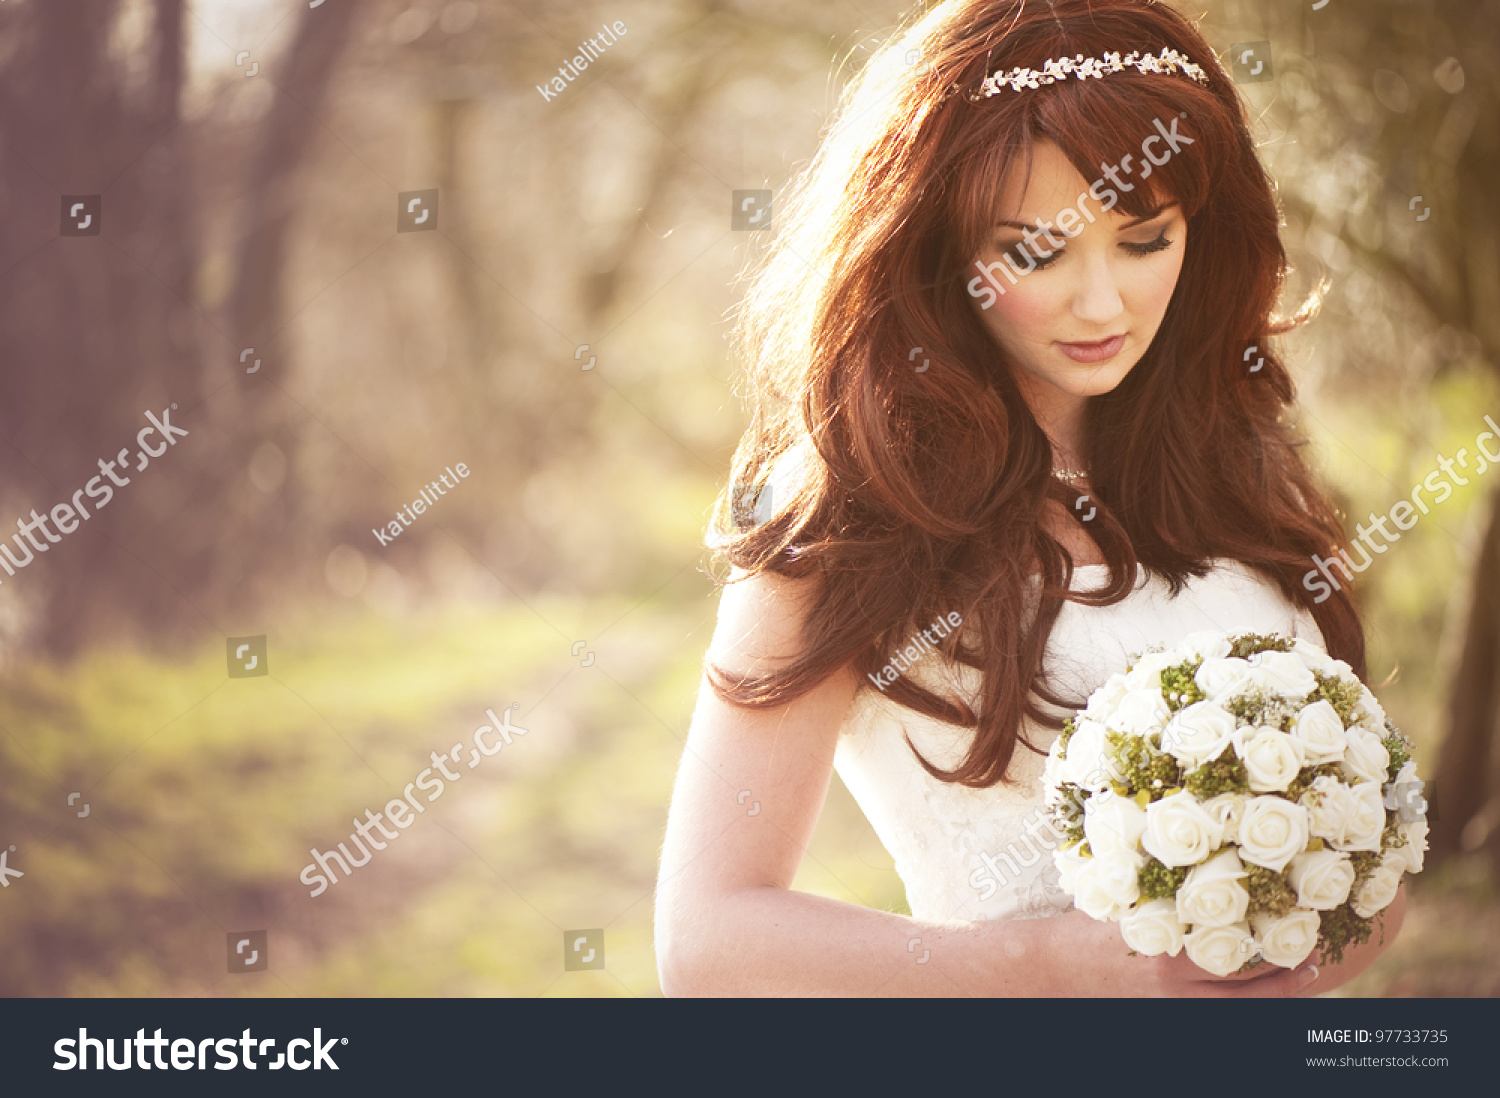 Beautiful bride outdoors in a forest. #97733735